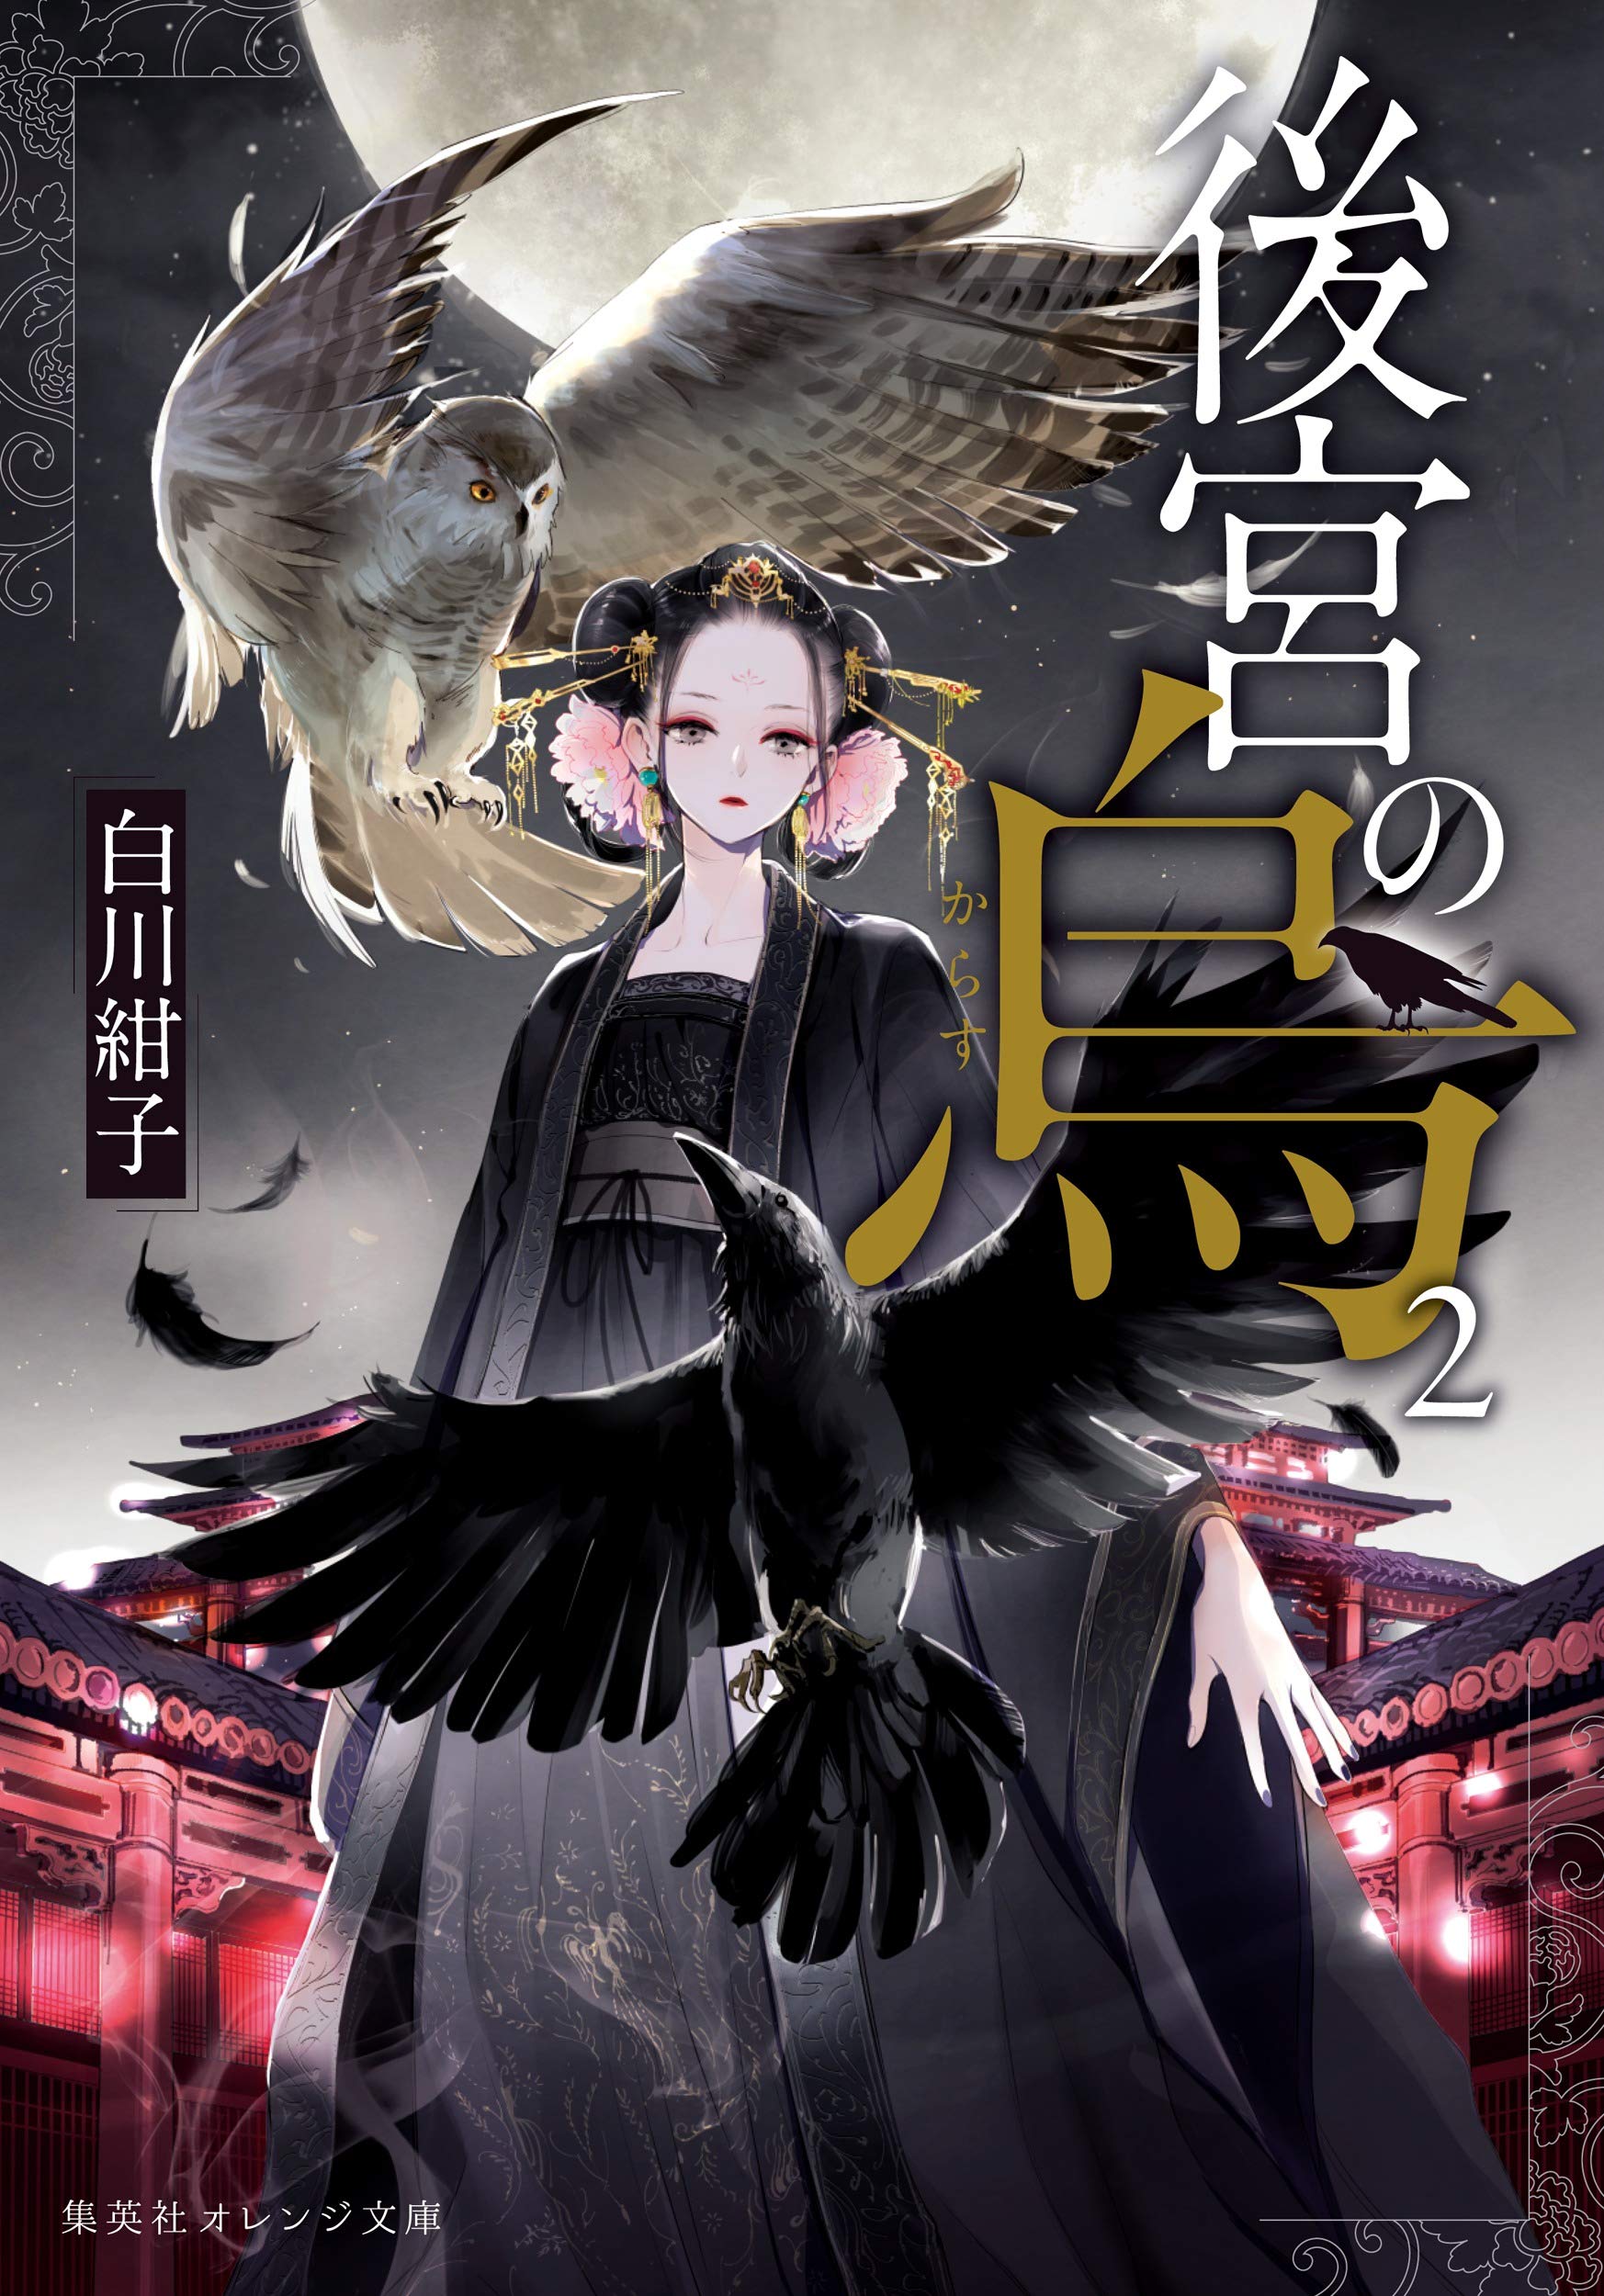 Do Jusetsu and Koushun End up Together in Raven of the Inner Palace